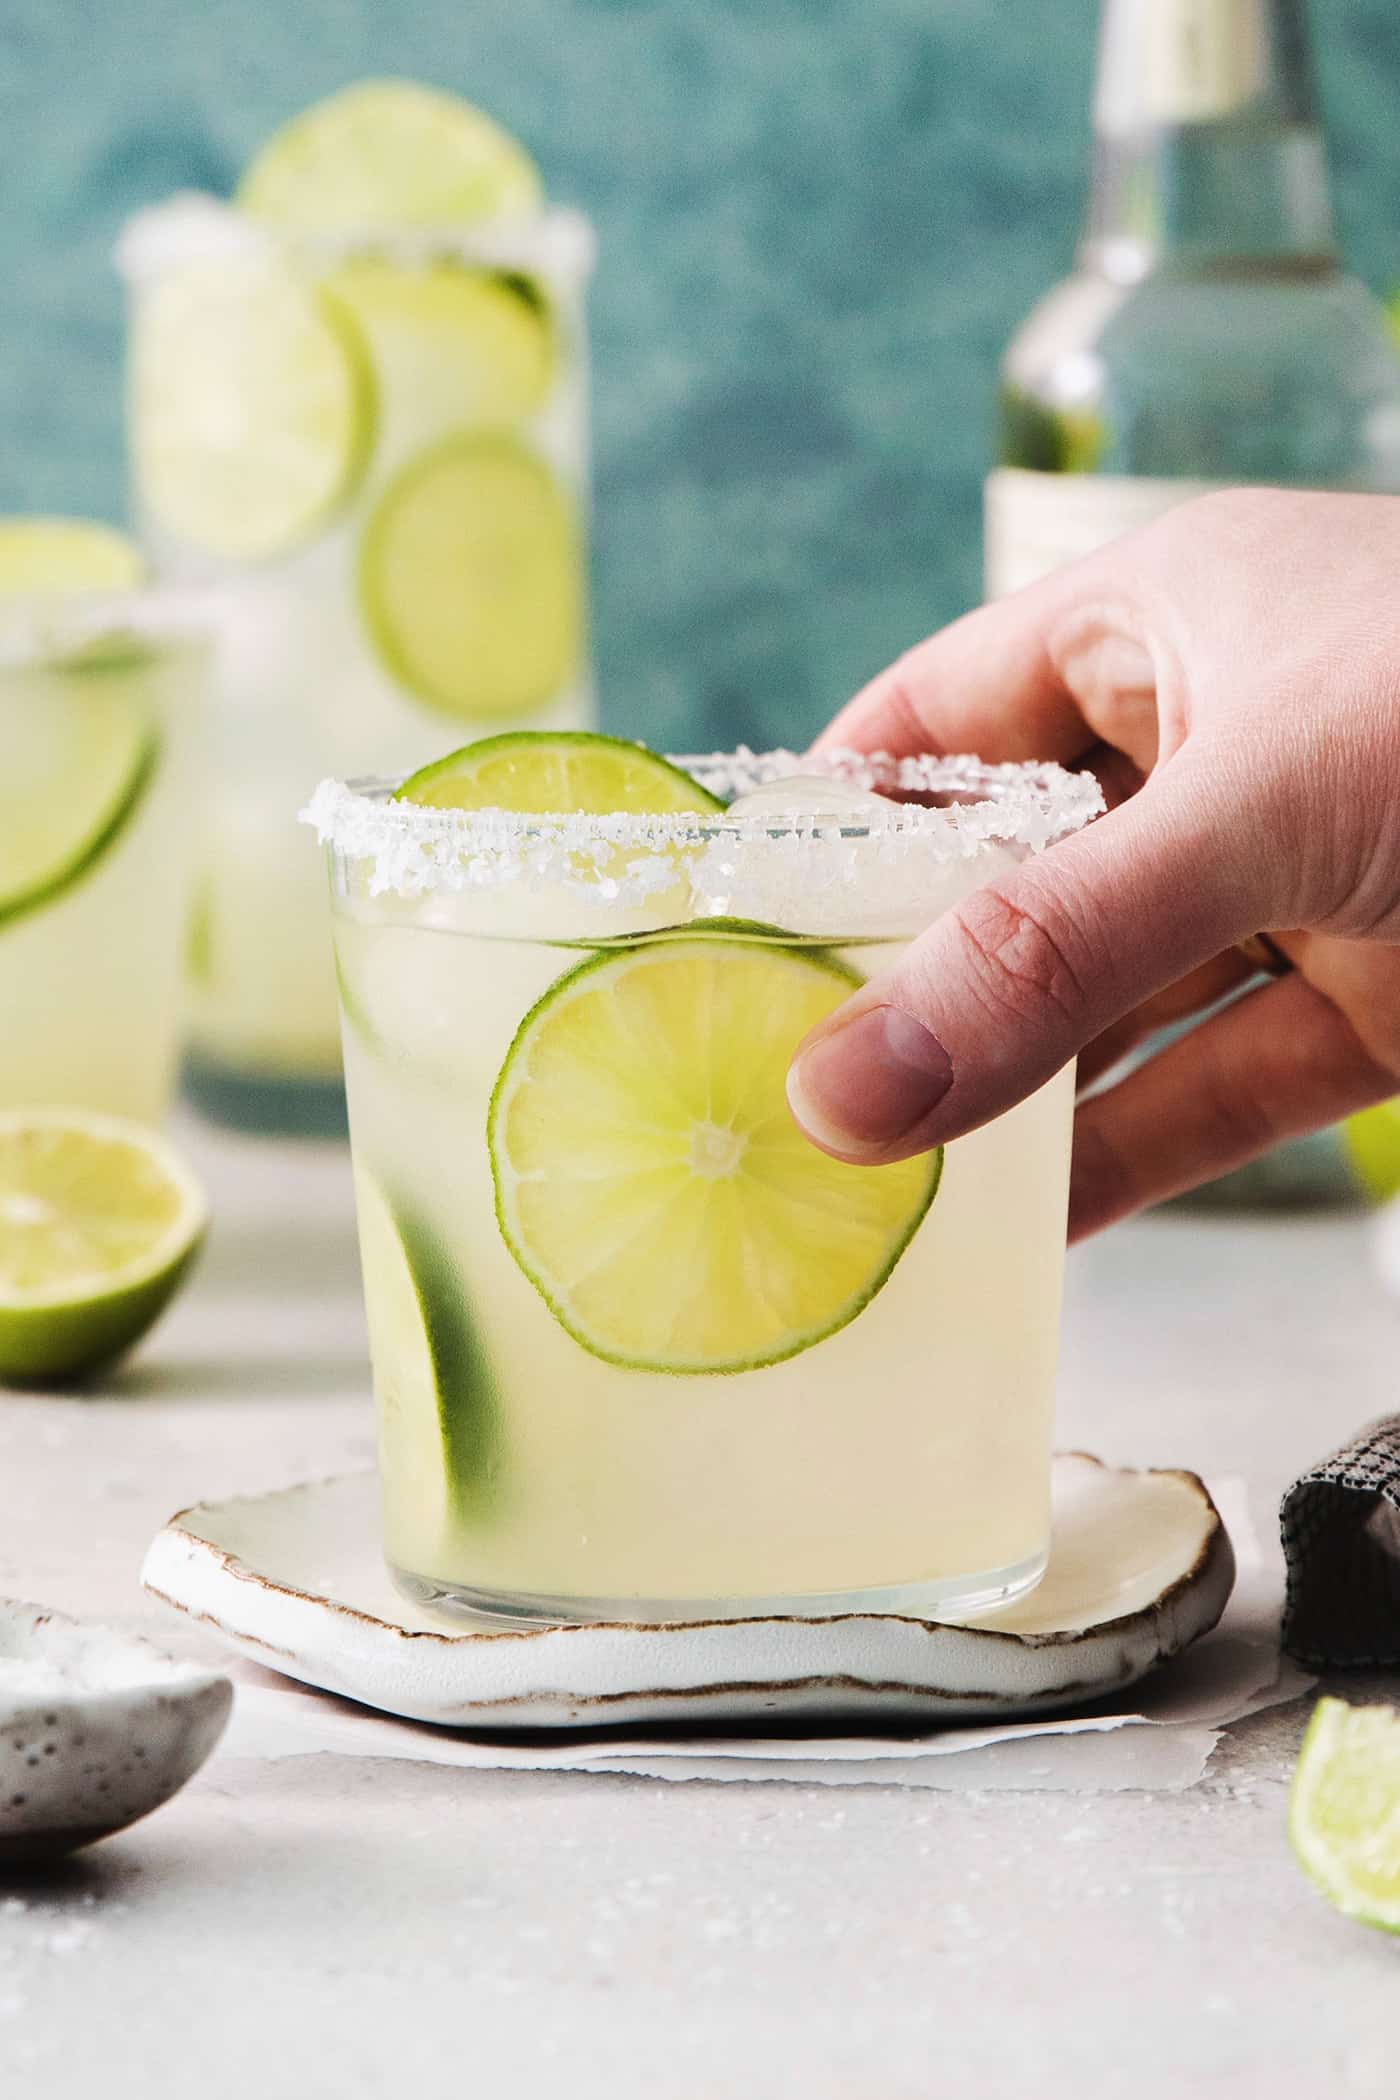 A hand reaches to pick up a glass of classic margarita with more margaritas in the background.